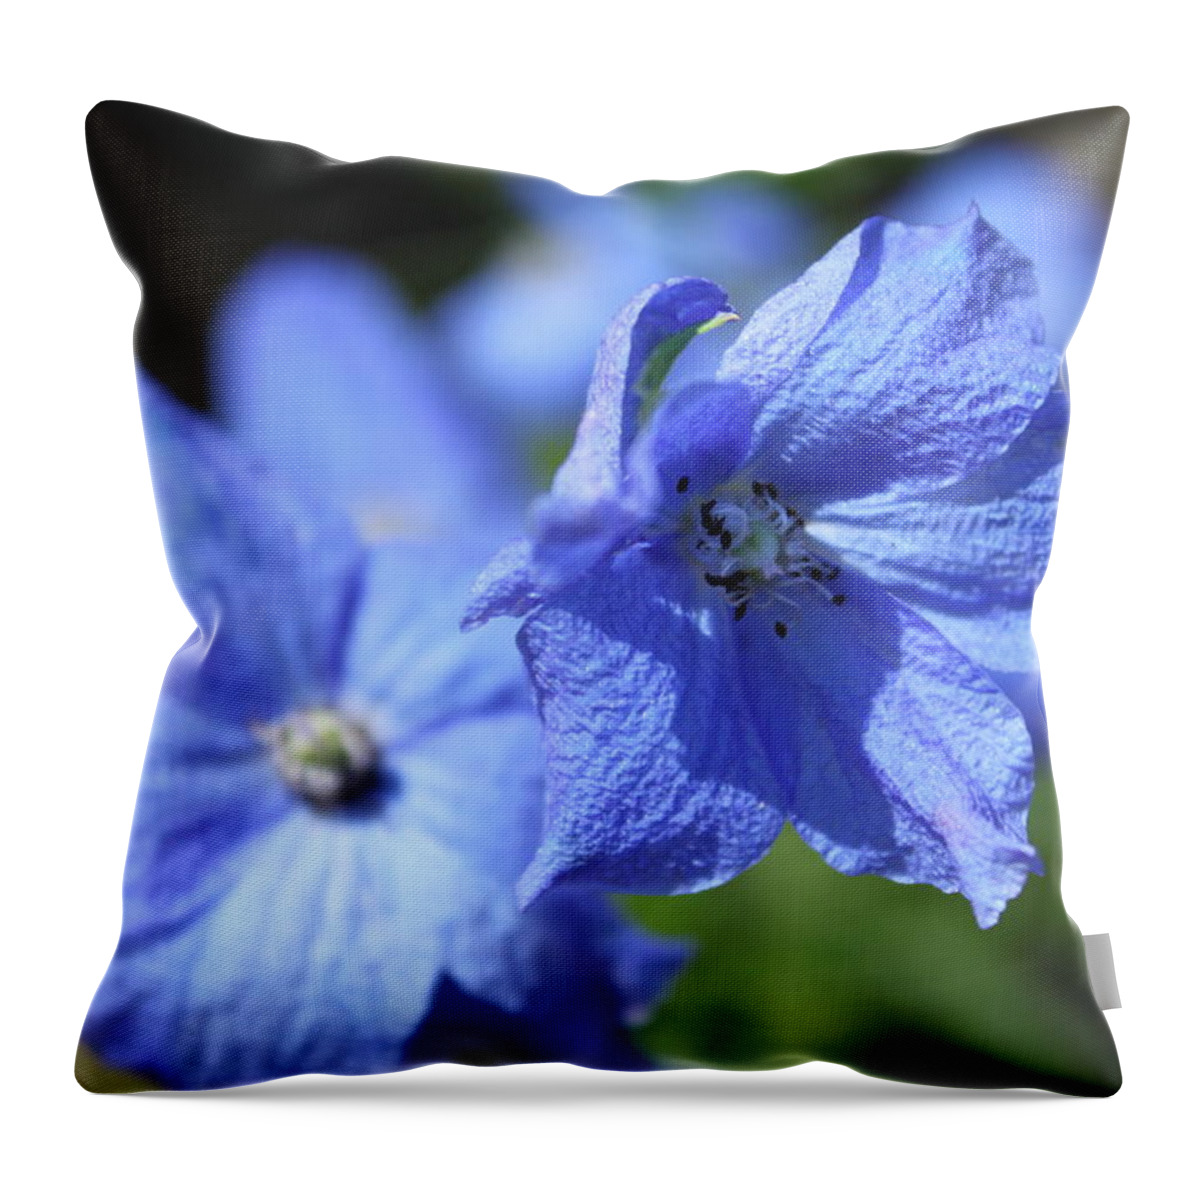 Flower Throw Pillow featuring the photograph Periwinkle Flower by Lauri Novak